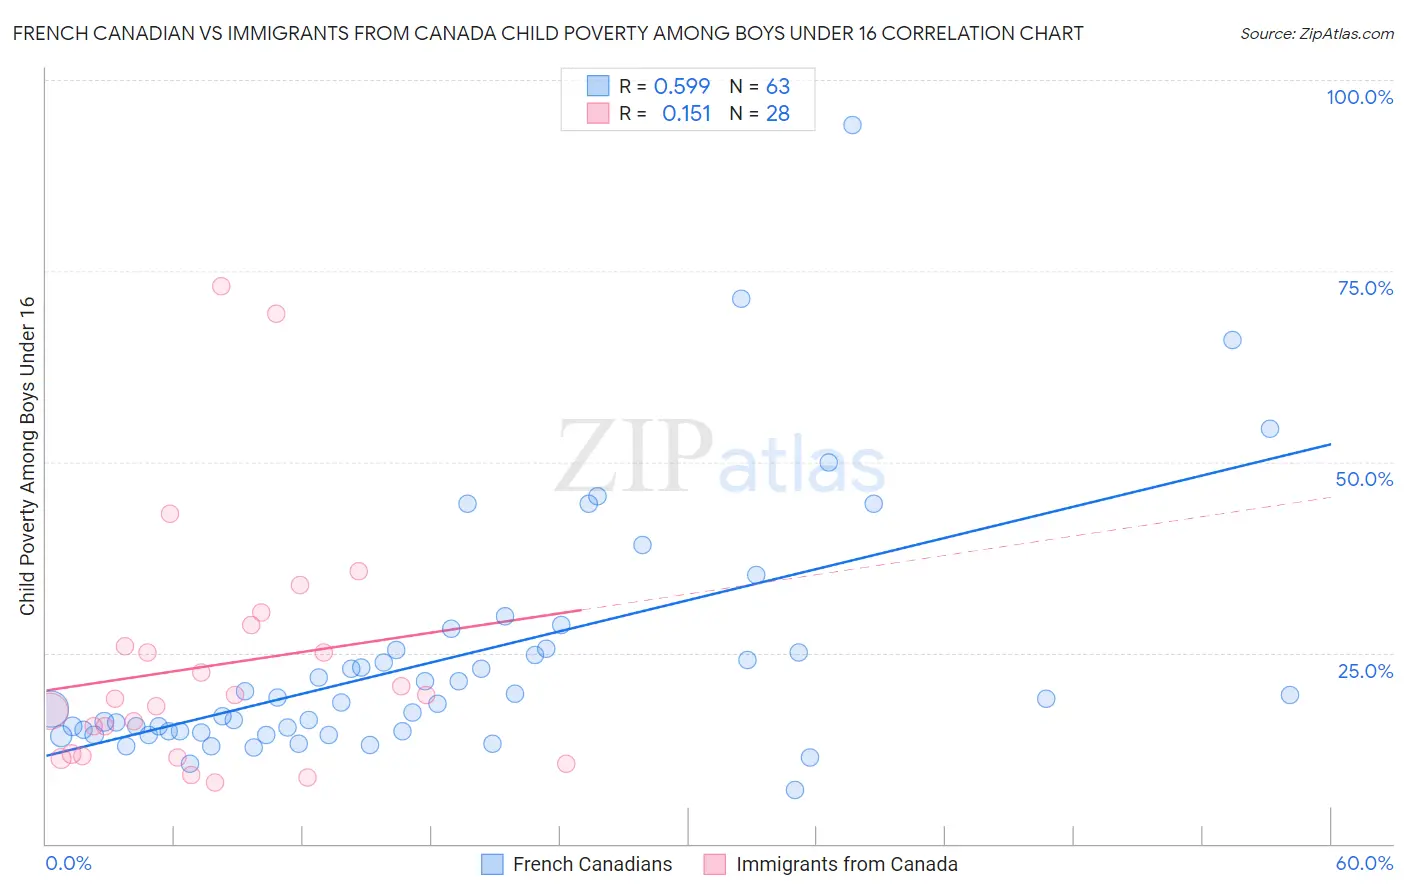 French Canadian vs Immigrants from Canada Child Poverty Among Boys Under 16